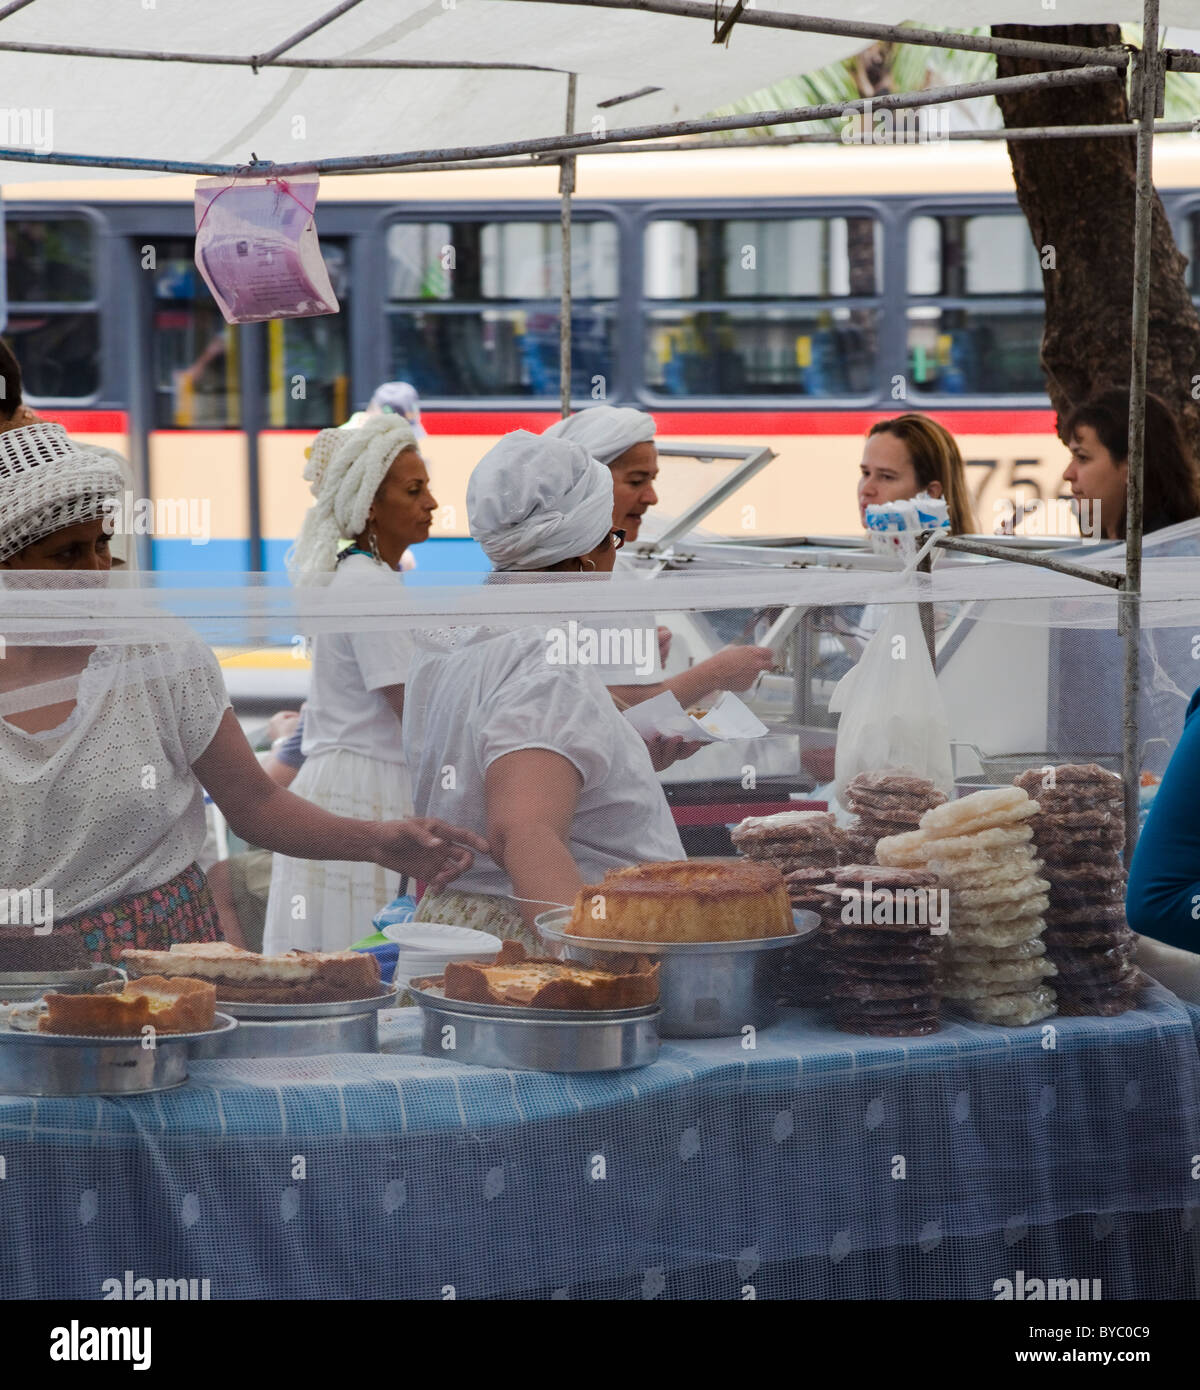 https://c8.alamy.com/comp/BYC0C9/food-stall-at-the-market-in-praa-general-osrio-ipanema-district-rio-BYC0C9.jpg